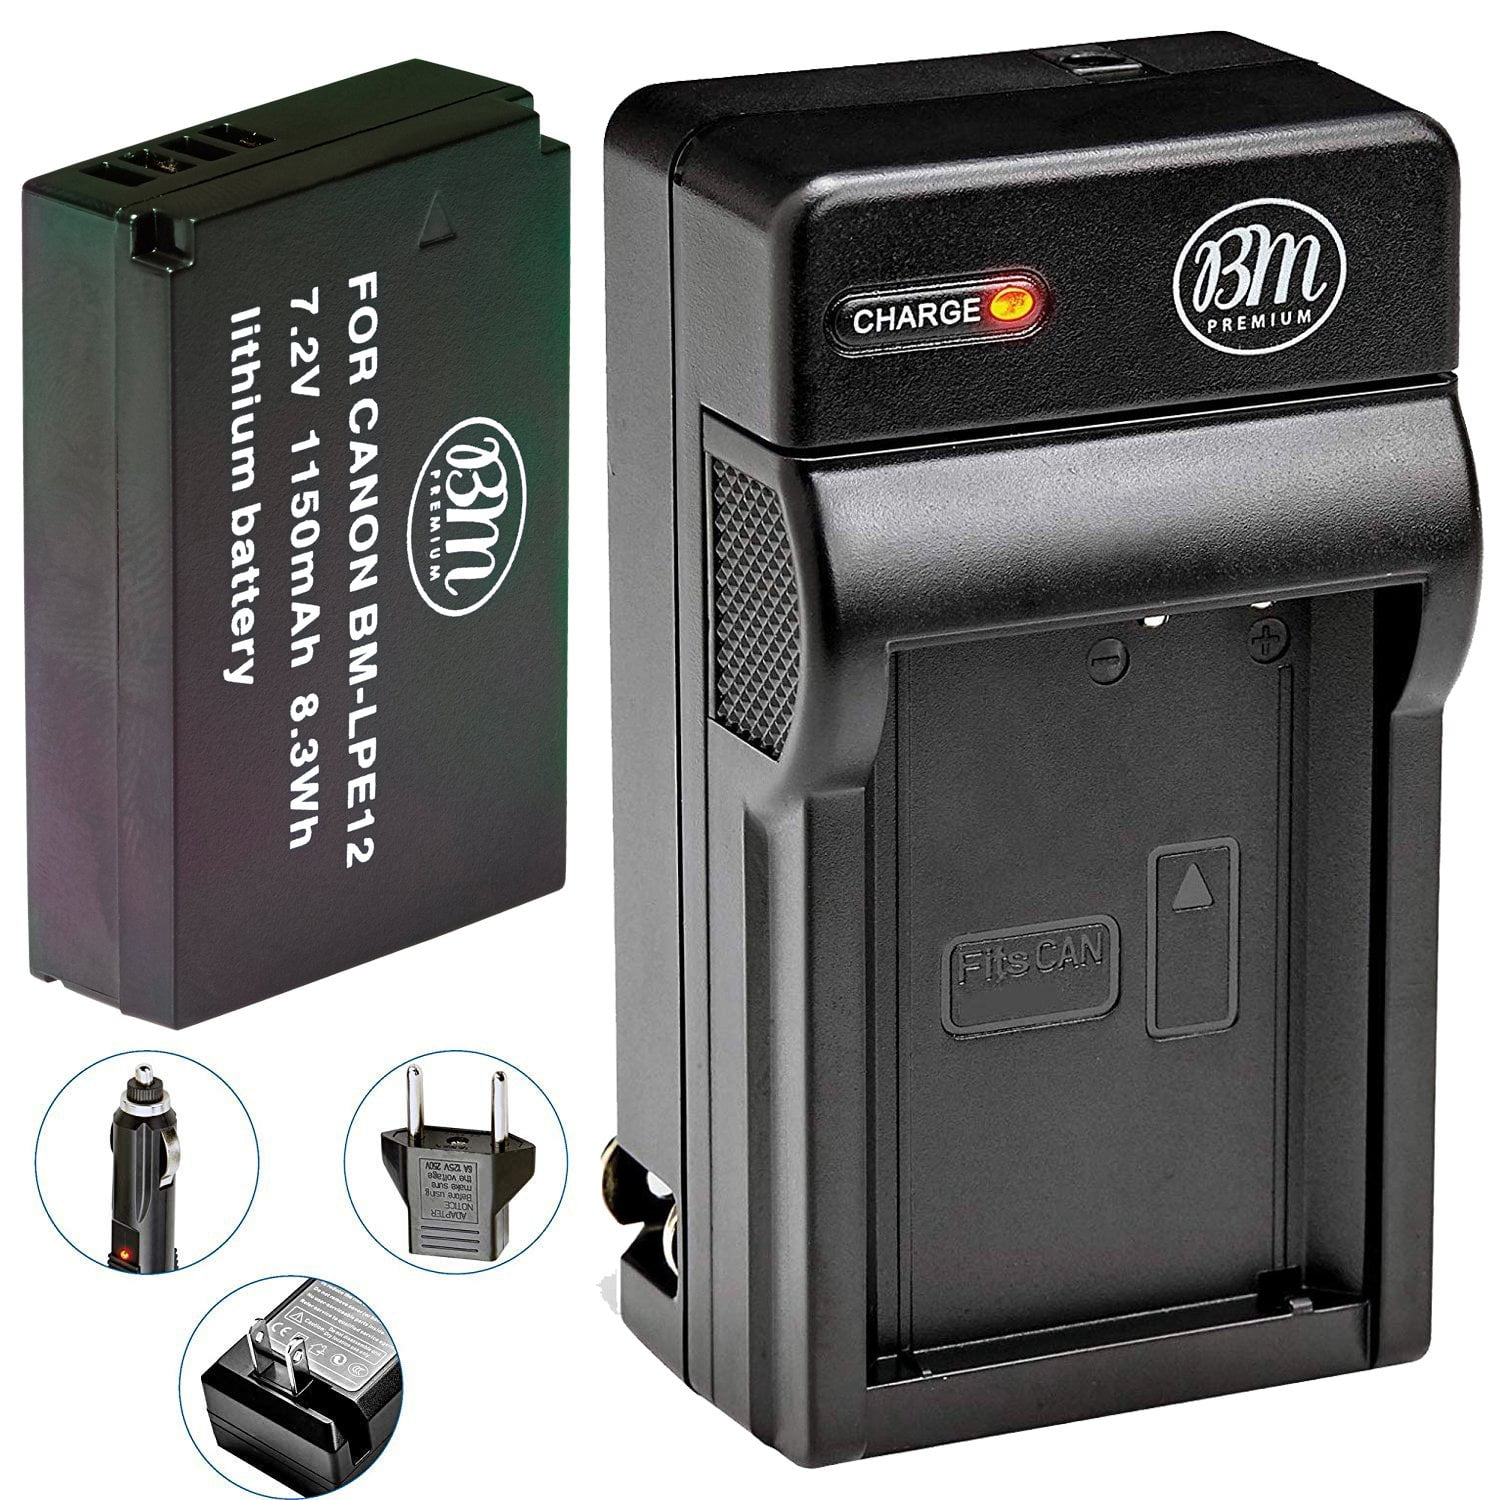 teori Skråstreg inflation BM Premium LP-E12 Battery and Charger Kit for Canon EOS-M, EOS M2, EOS M10,  EOS M50, EOS M50 Mark II, EOS M100, EOS M200, SX70 HS, Rebel SL1 Cameras -  Walmart.com